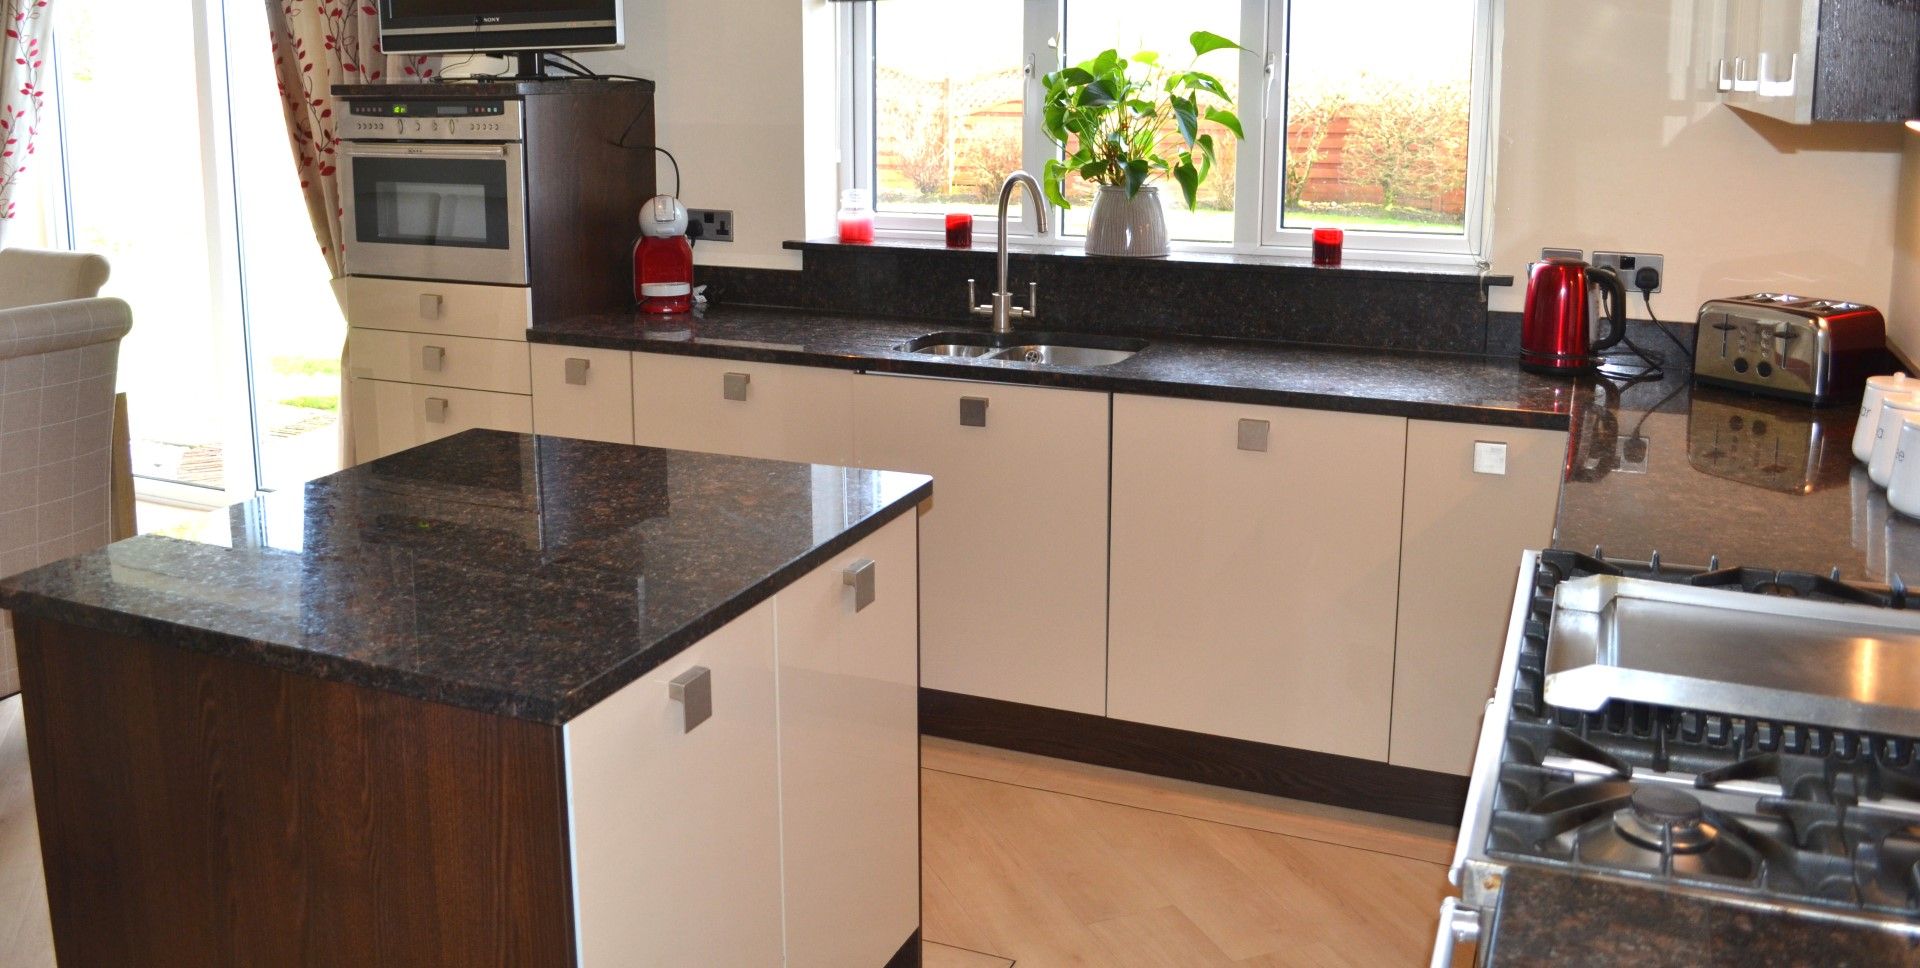 1 x Kitchen Design Bespoke Fitted Kitchen With Utility Room, Granite Worktops And Neff Appliances - - Image 11 of 41